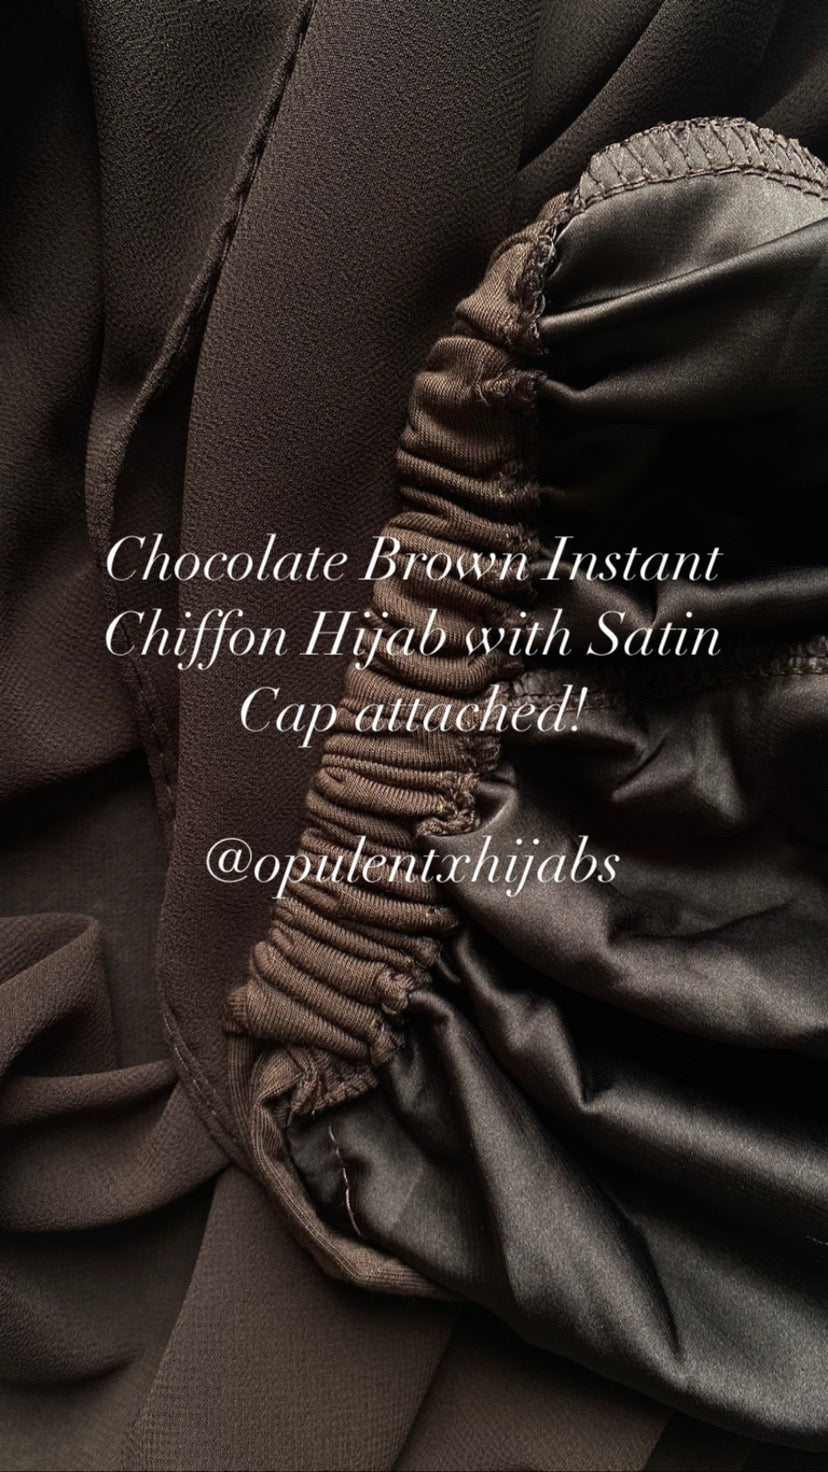 Chocolate Brown - Instant Chiffon Hijab with Satin Cap attached